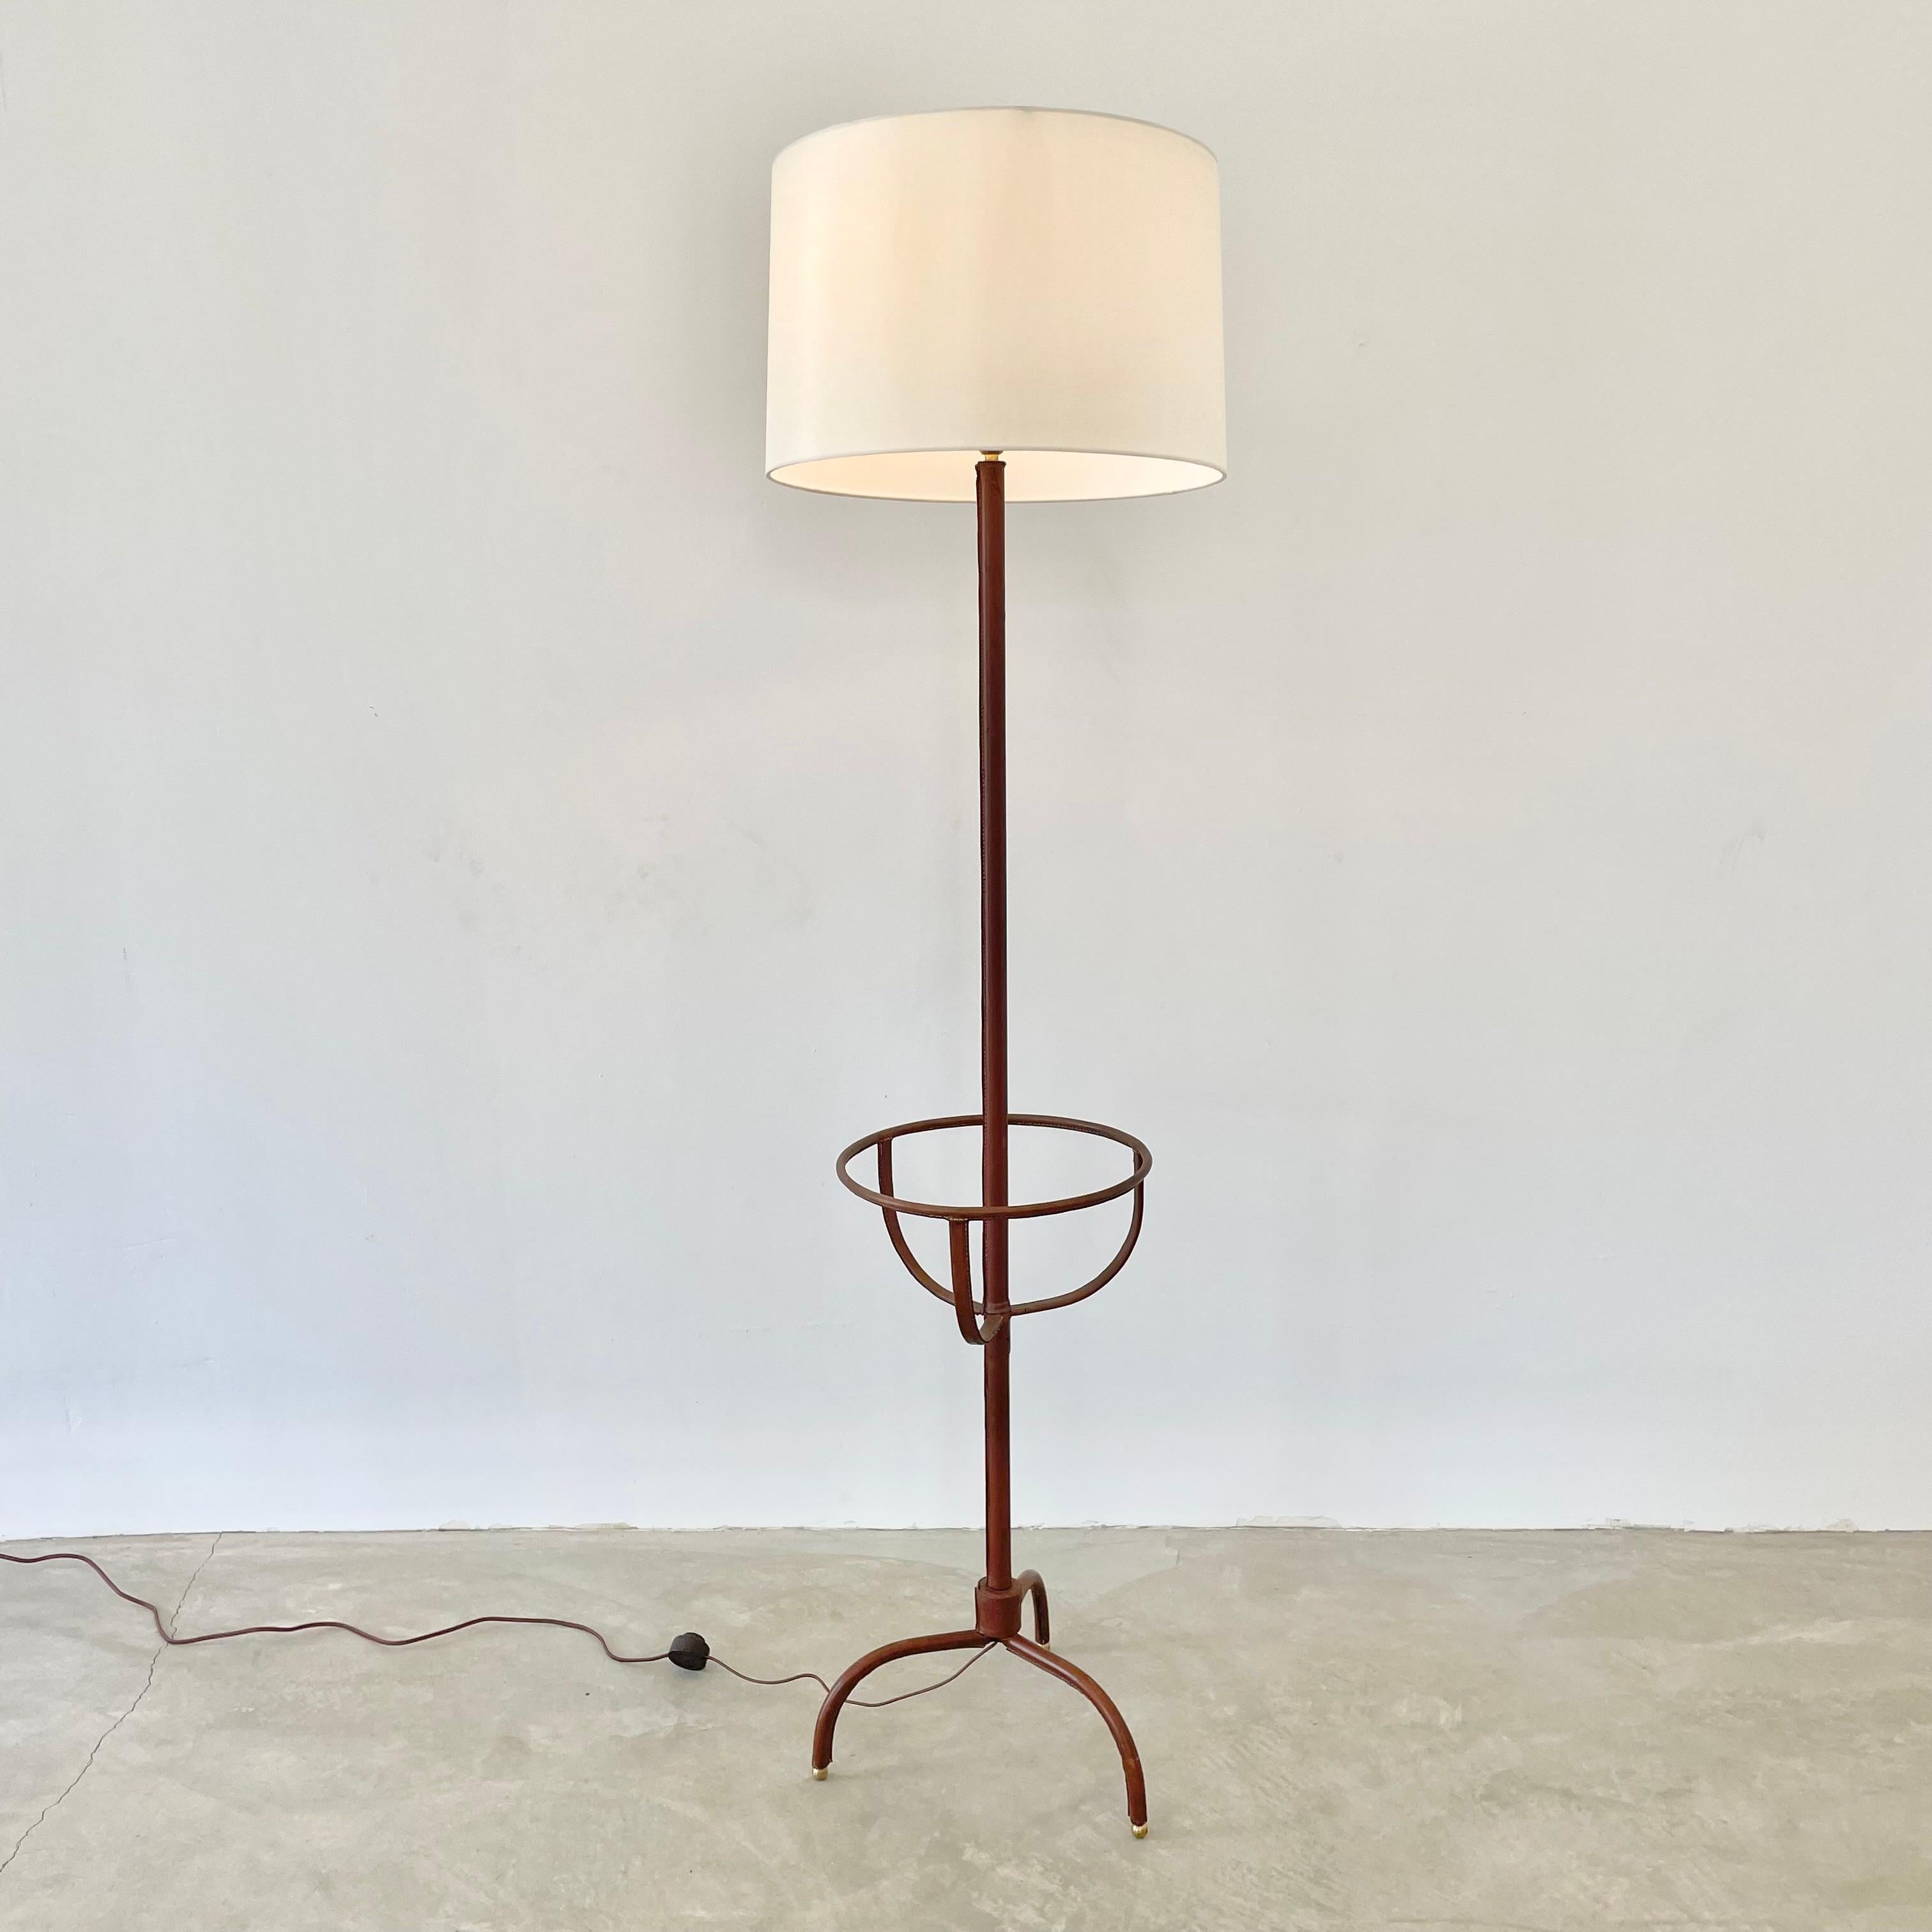 Handsome saddle leather and metal floor lamp by French designer Jacques Adnet. Entirely wrapped in leather. Made in the 1950s. Tripod leather wrapped base features brass ball feet and secures into the stem which is also wrapped in a beautiful saddle